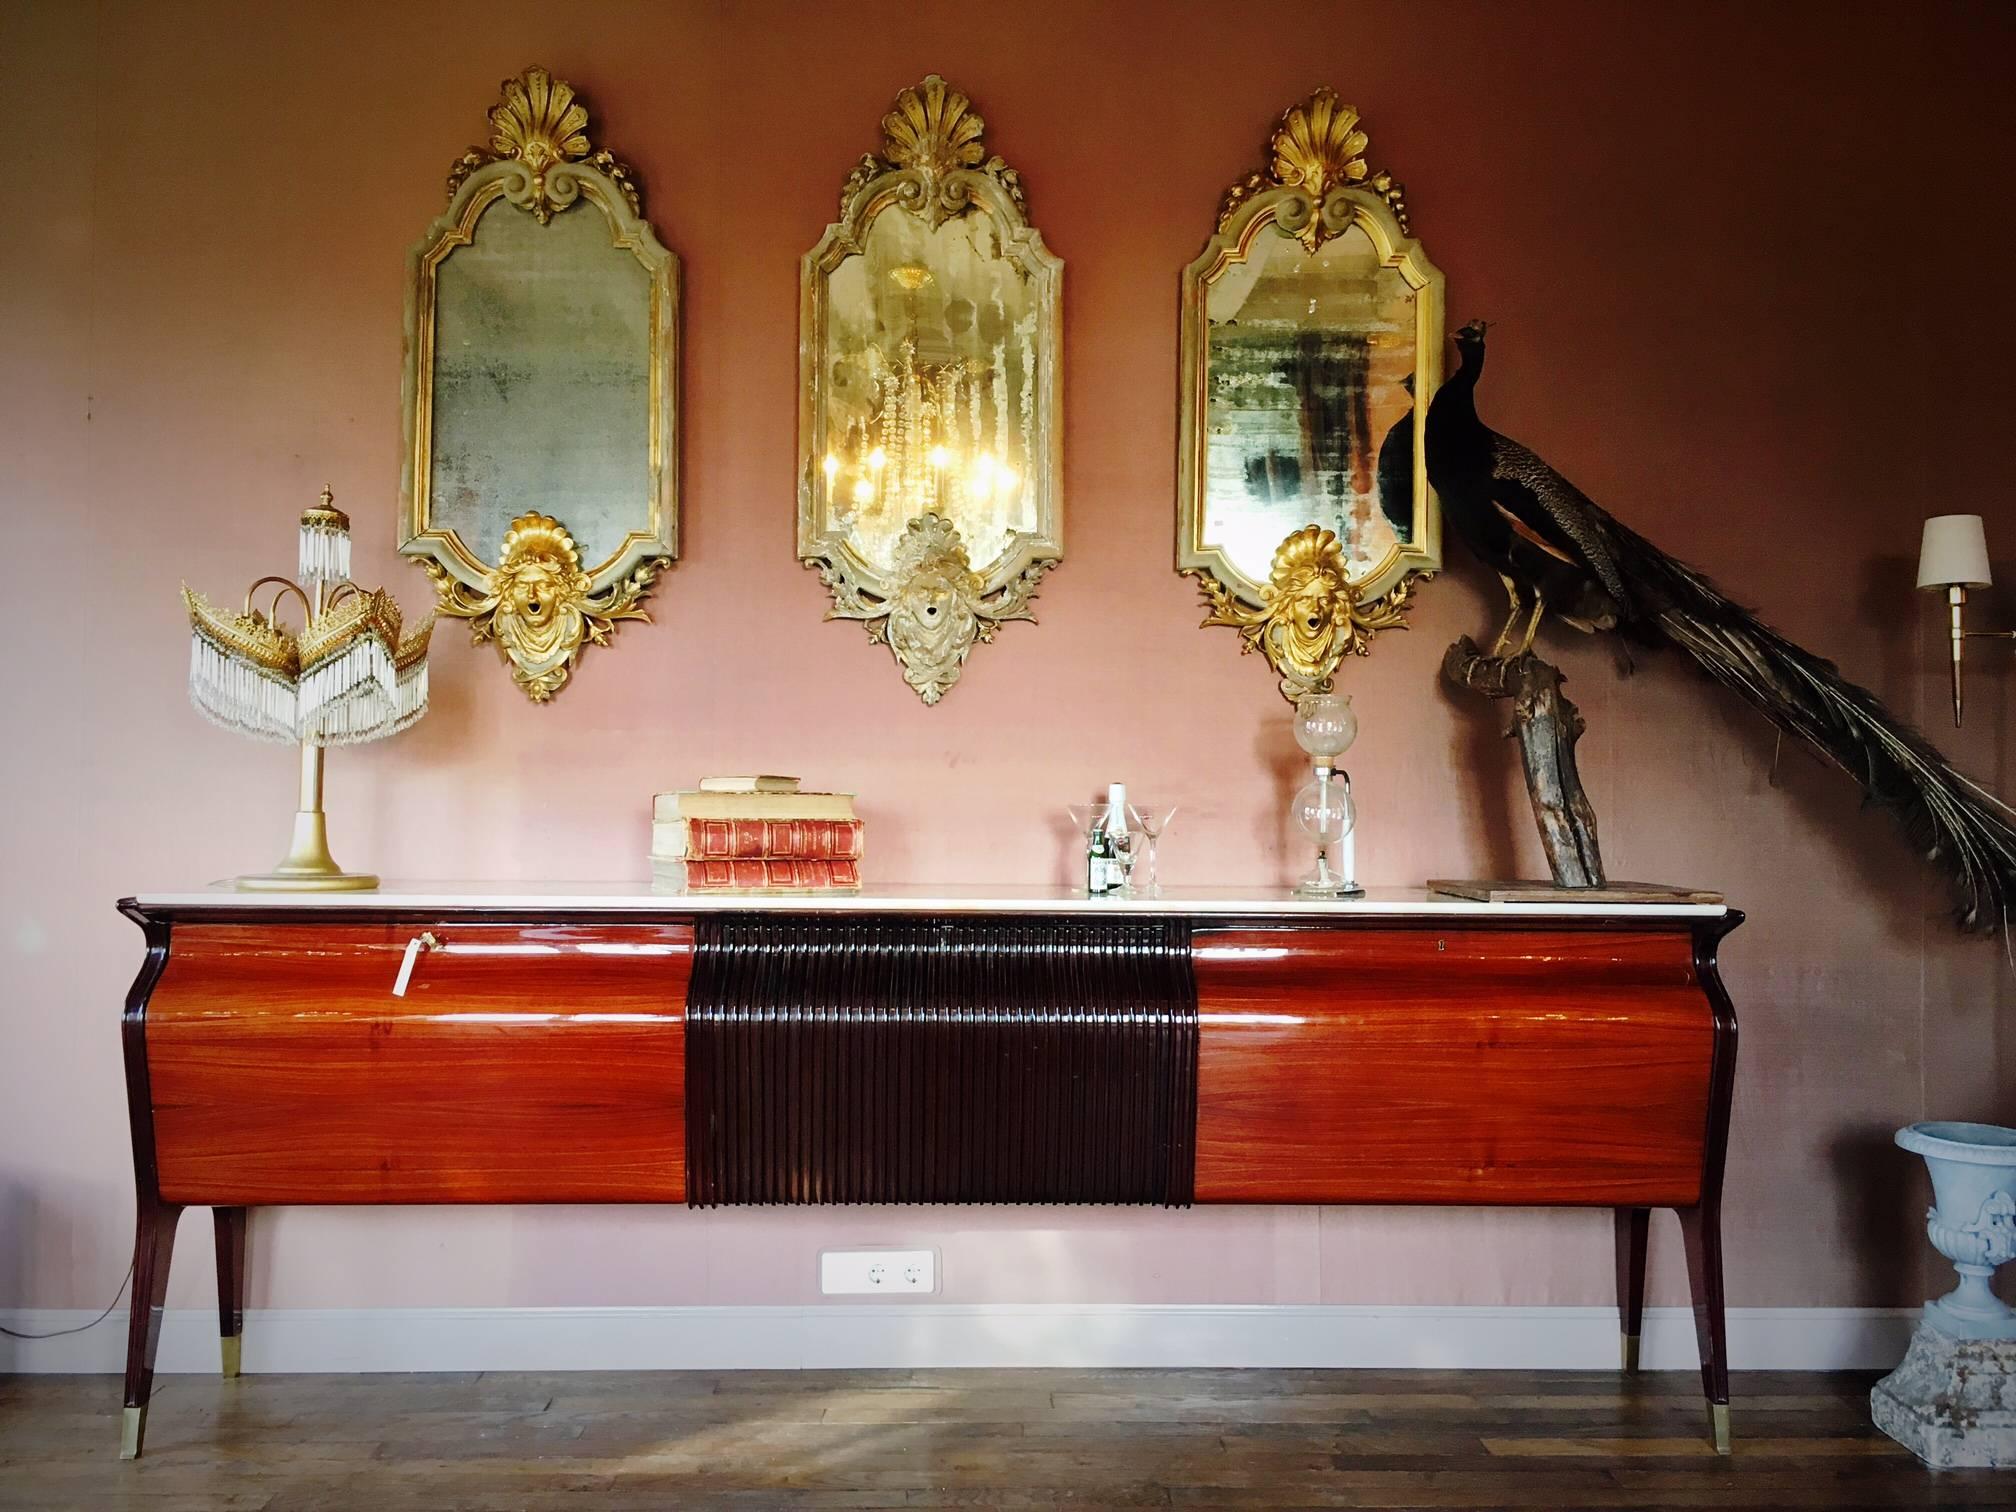 Cabinet in the style of Italian designer Osvaldo Borsani (1911-1985). Borsani studied art and architecture in Milan. He became very well-known as a designer of furniture with technical innovations. The prunus surface is very shiny and in a great